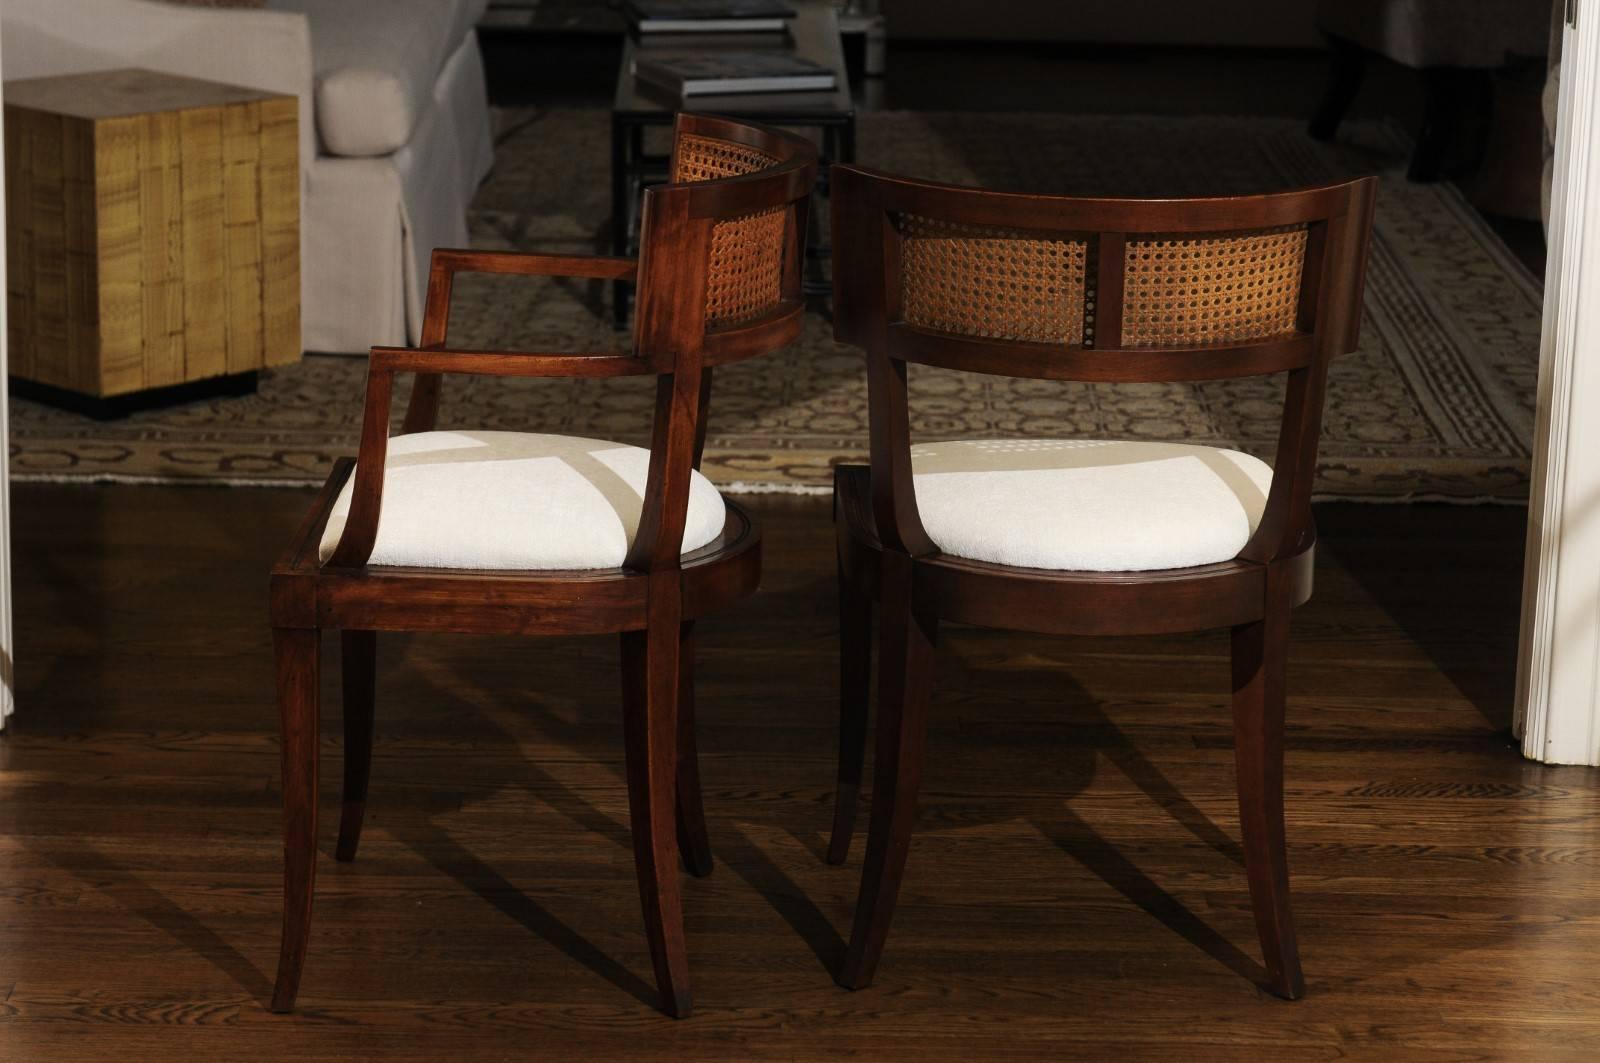 The rarest of the rare: An exceptional, meticulously restored set of eight (8) cane back Klismos dining chairs by Baker Furniture, circa 1958. A set of this size is the Collector's equivalent of capturing a Purple Unicorn. This design is routinely